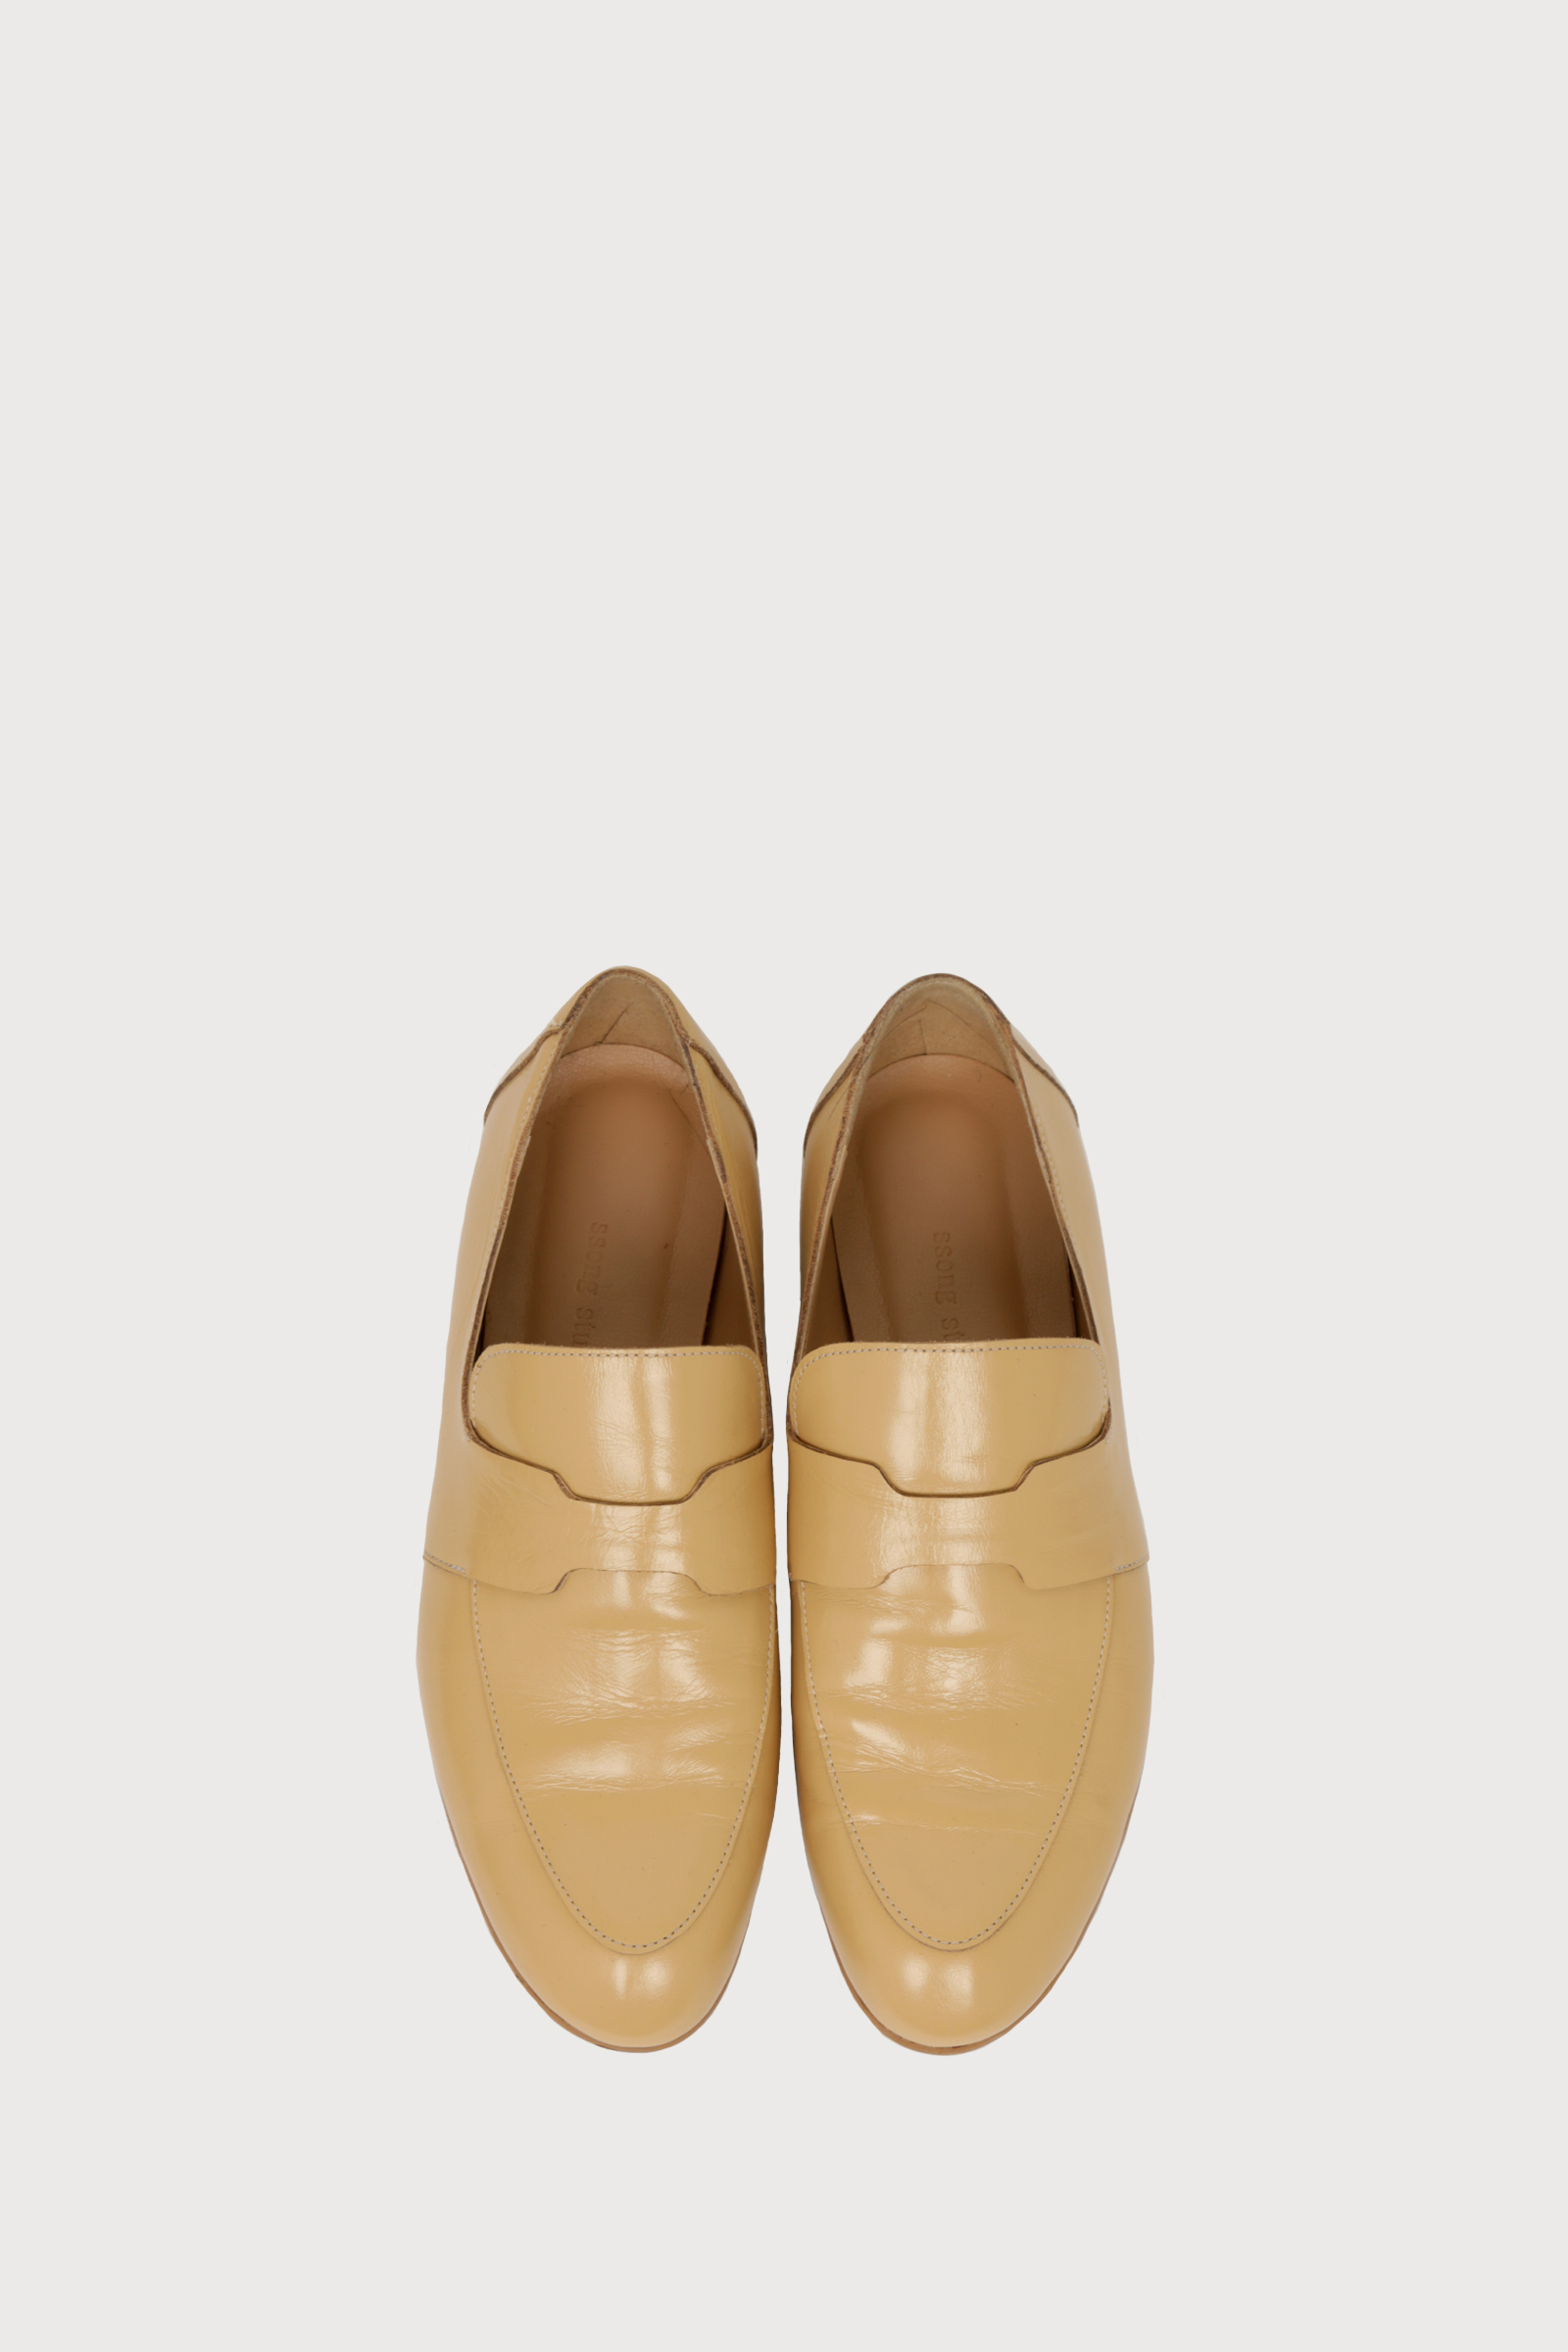 BUTTER ROUND LOAFER [수제화]